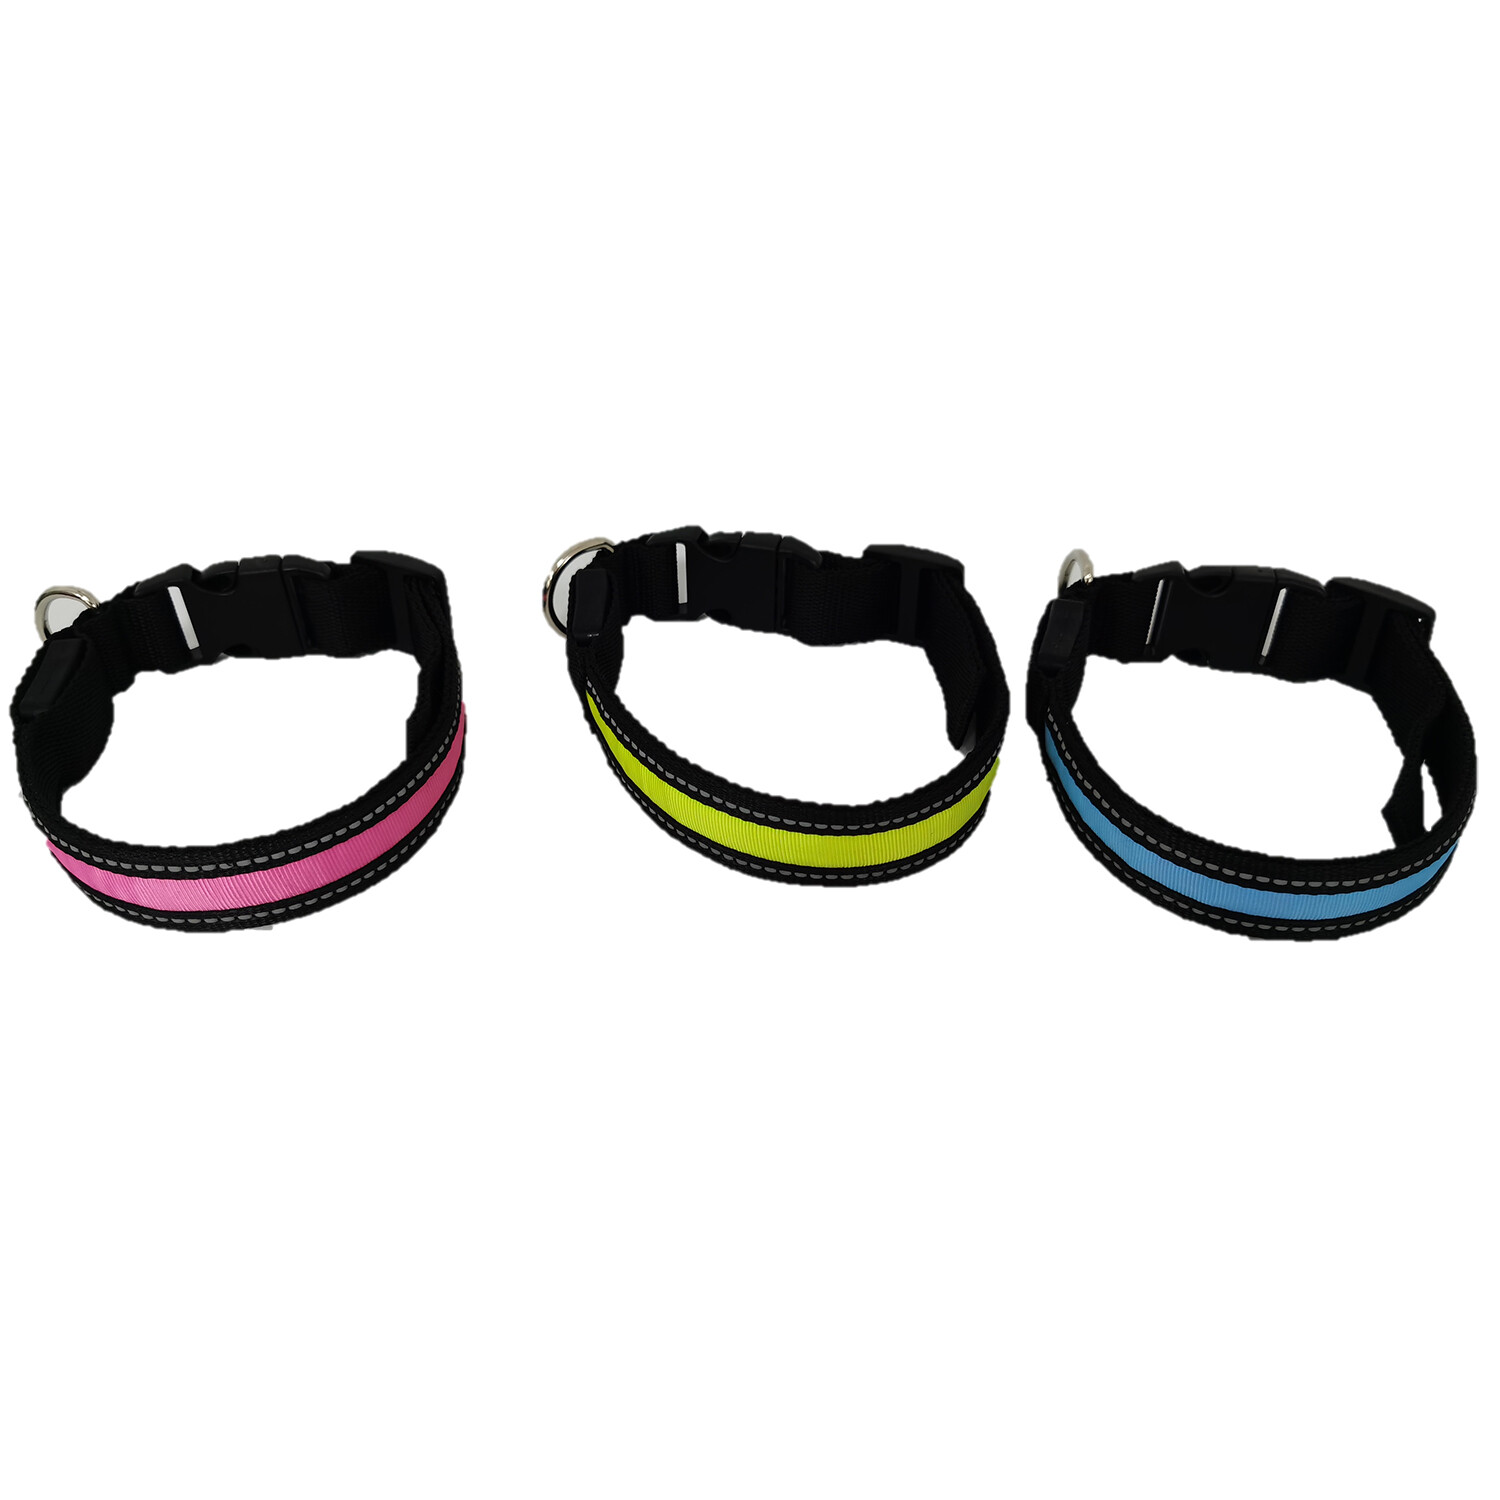 Clever Paws Reflective Rechargeable LED Pet Collar Image